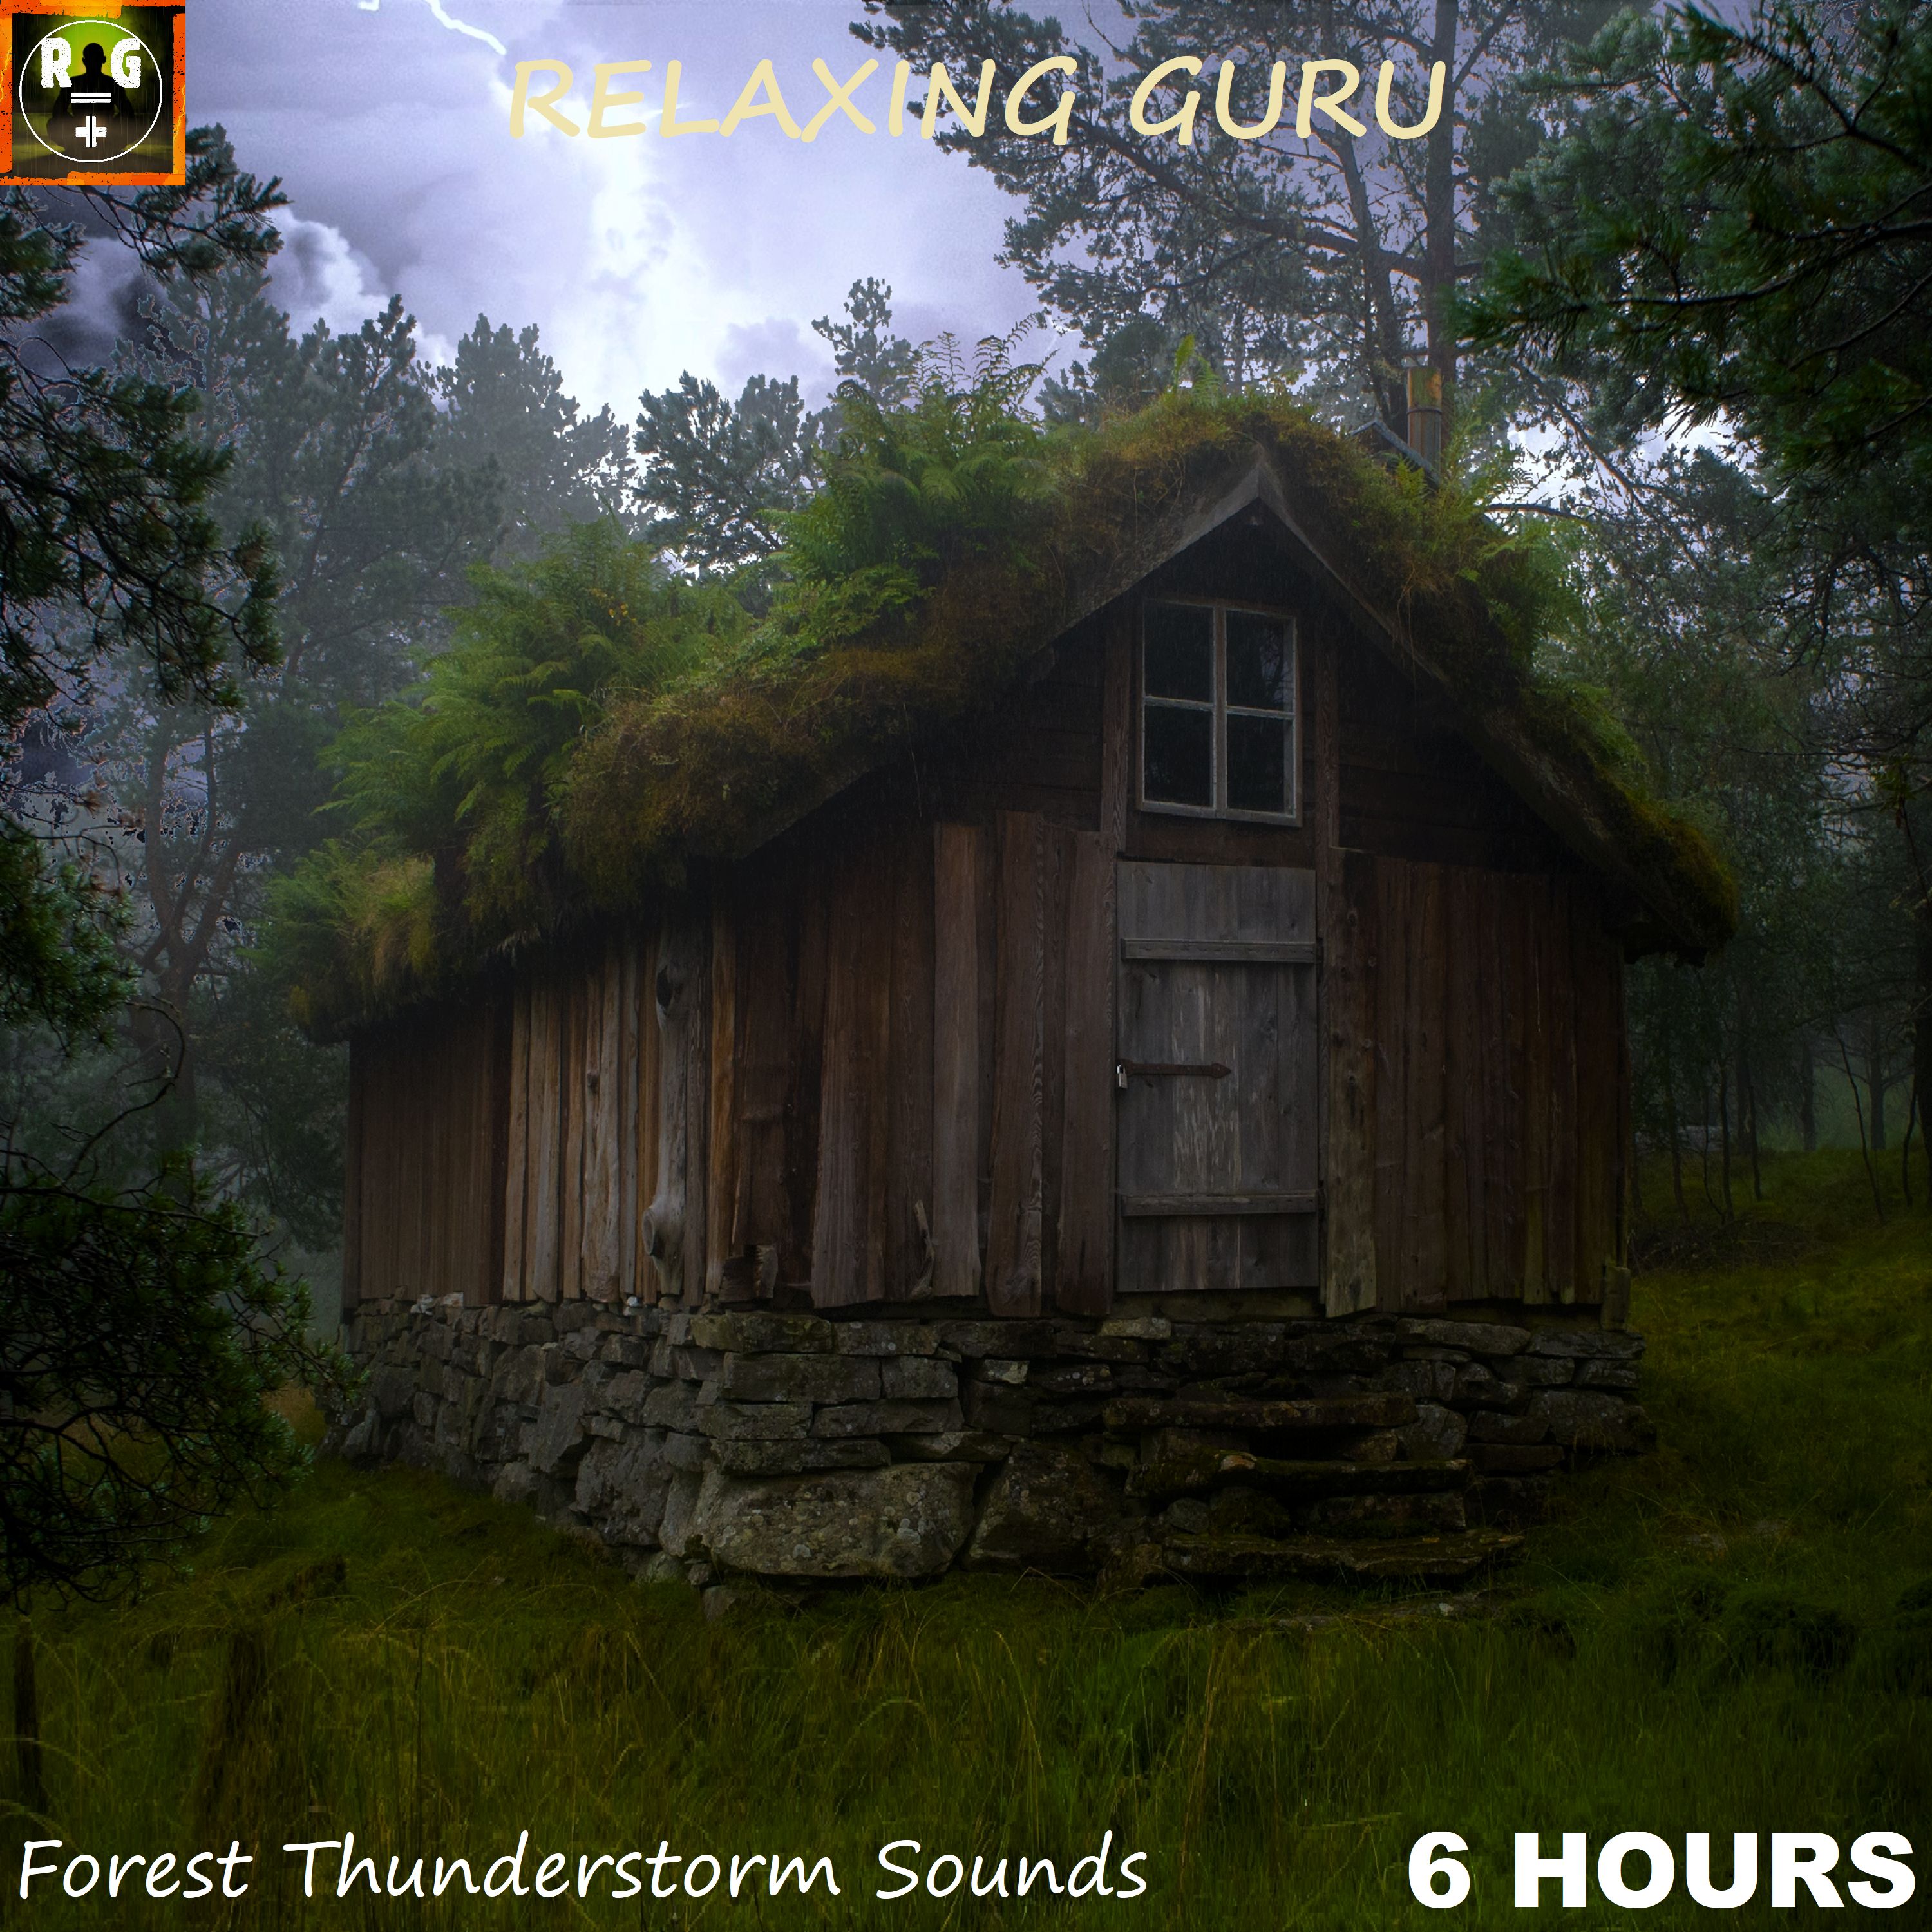 Hent Relaxing Rain & Thunder on a Wooden Hut deep in the Forest - Thunderstorm Sounds for Sleep (6 HOURS)